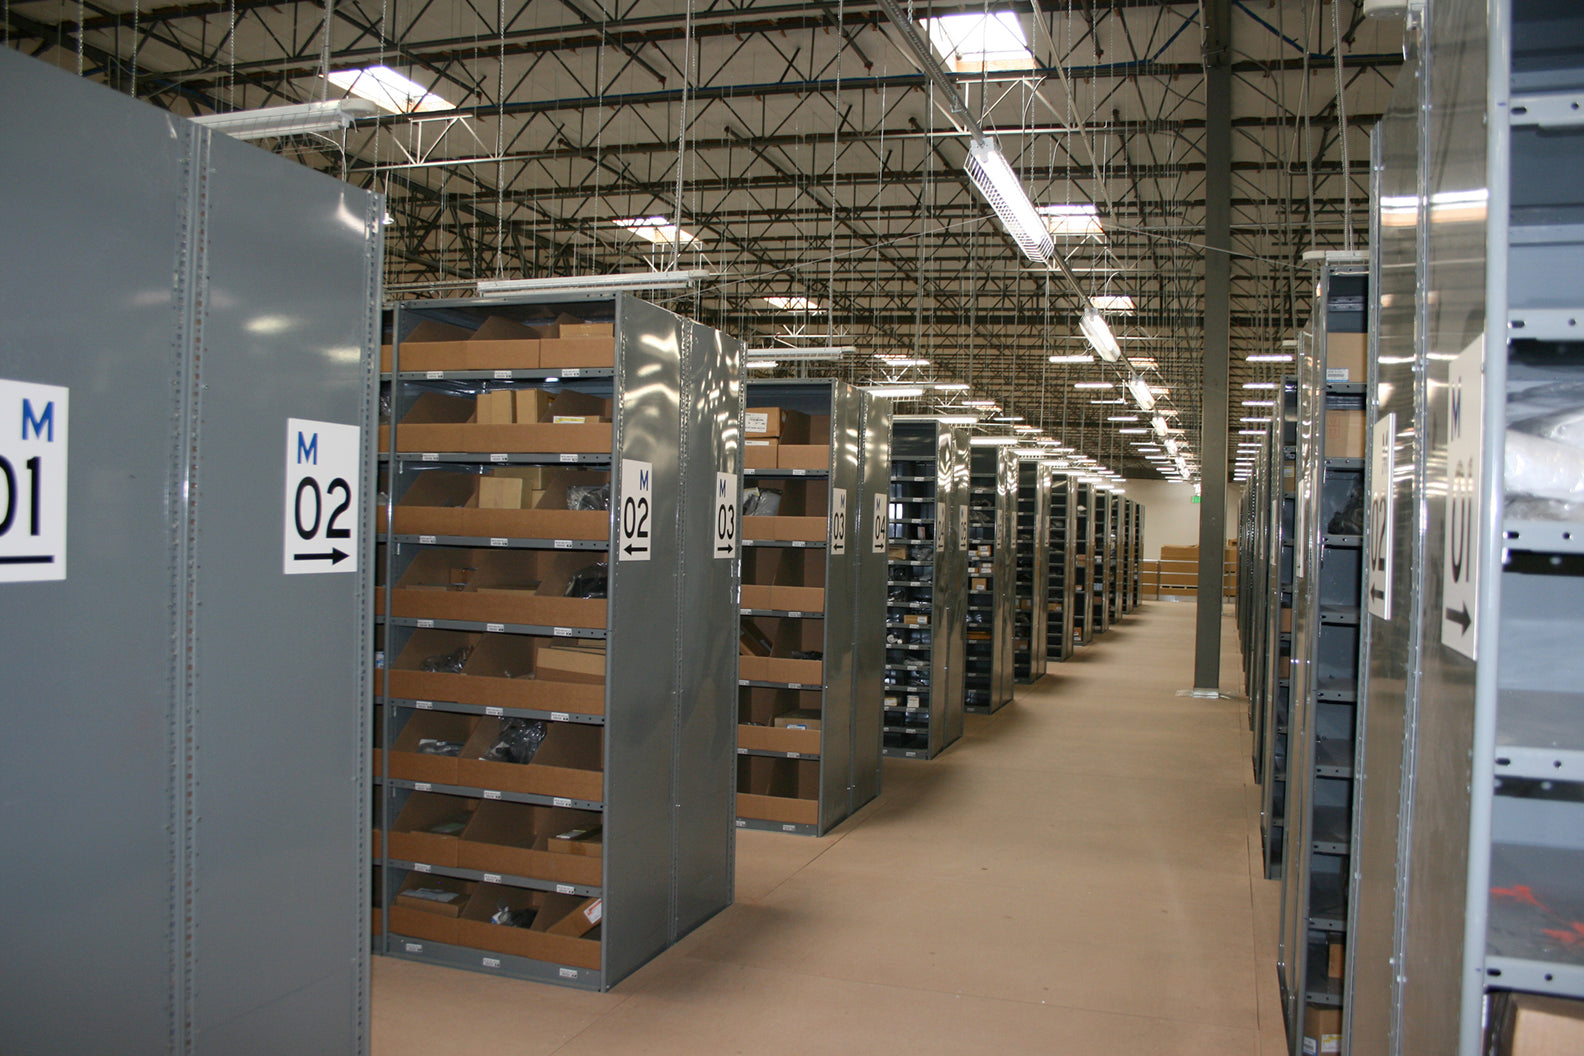 Deluxe Shelving - 7' 3'' high closed units